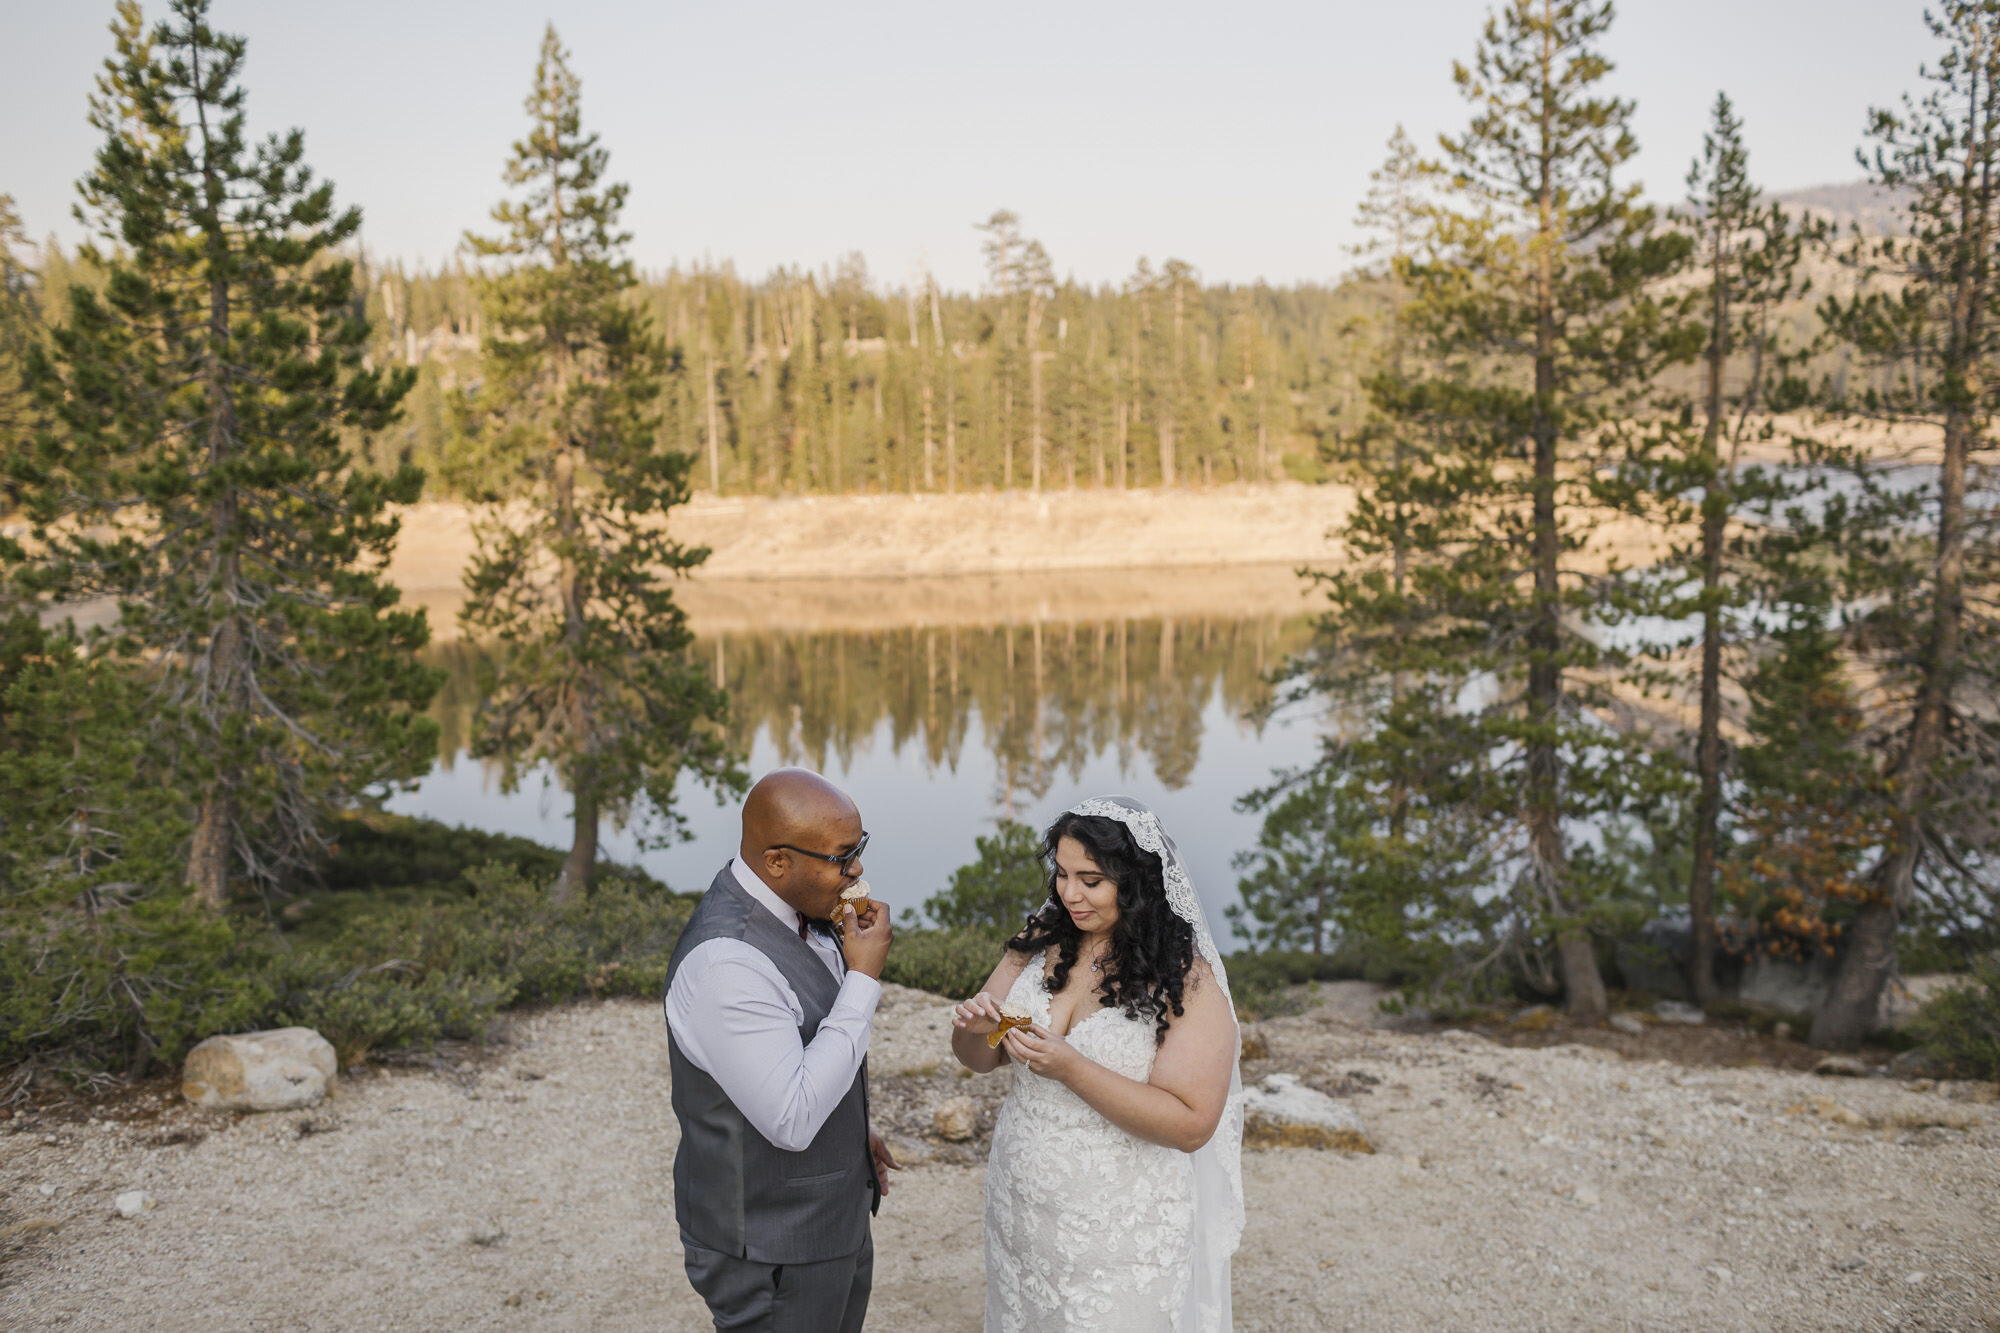 Bride and groom enjoy champagne and cupcakes after their wedding ceremony in the forest